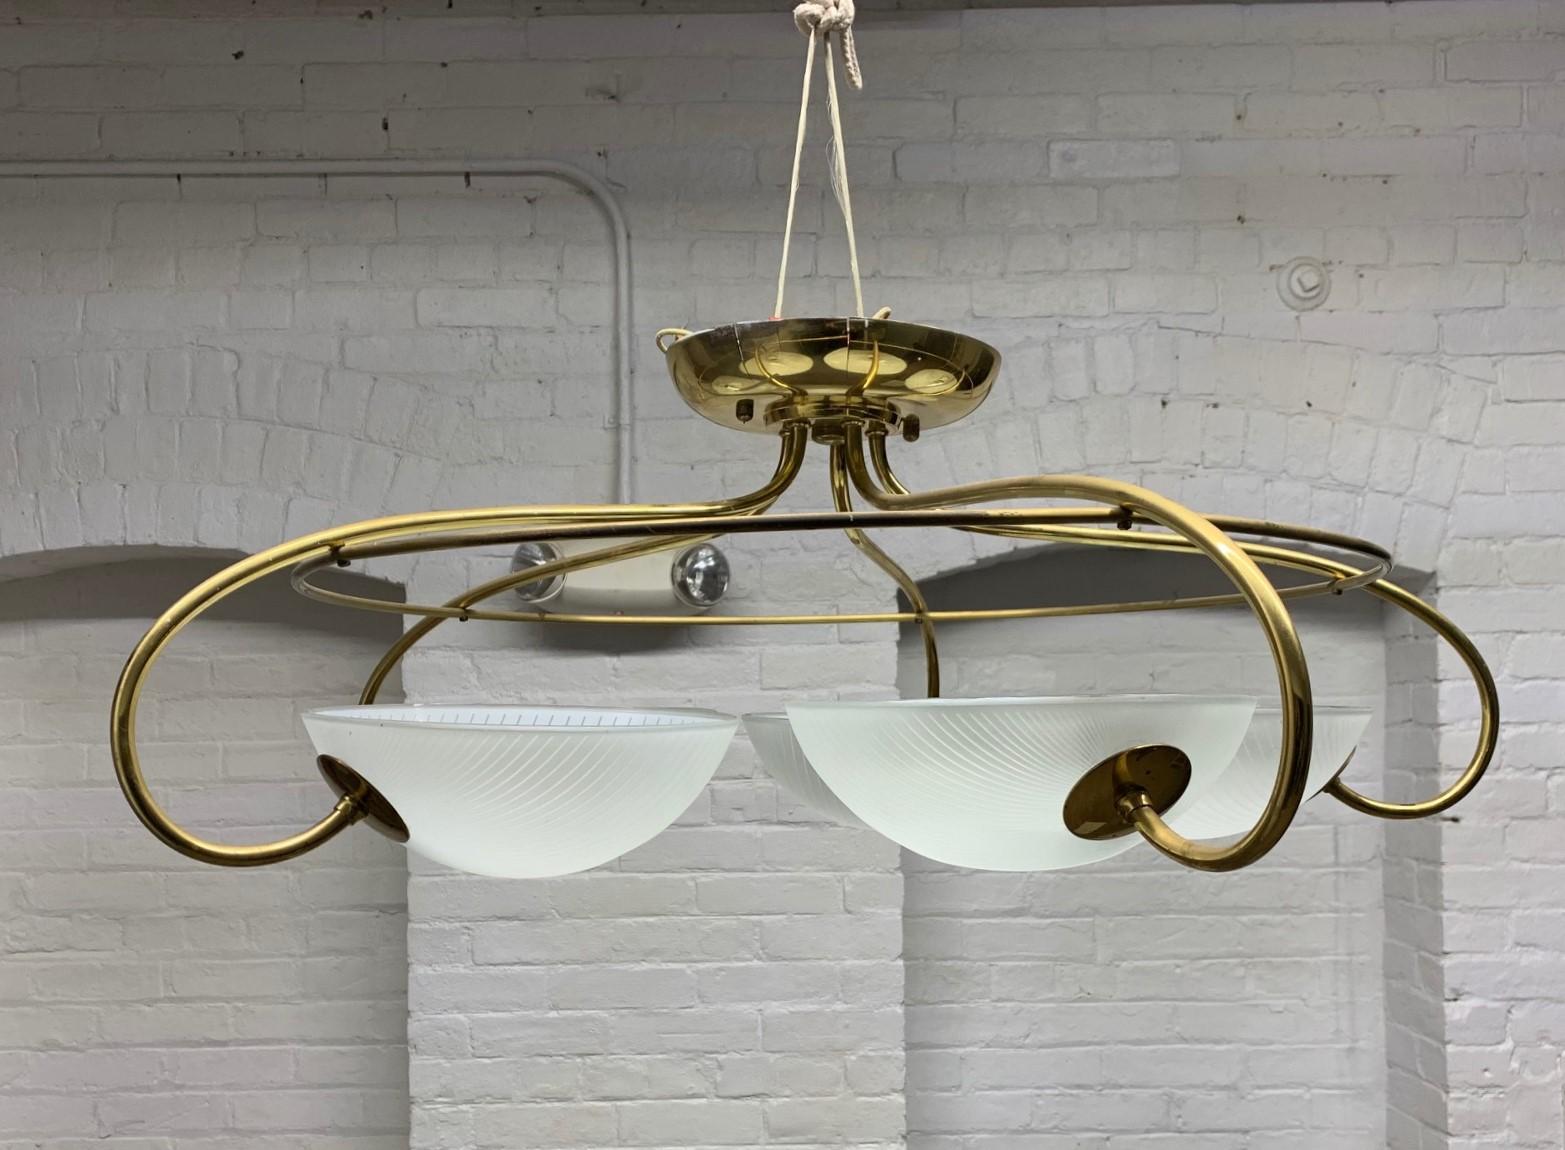 Pair of 1960s, Mid-Century Modern, Italian brass and glass light fixture / chandelier. Has five glass globes with a curved brass structural frame.